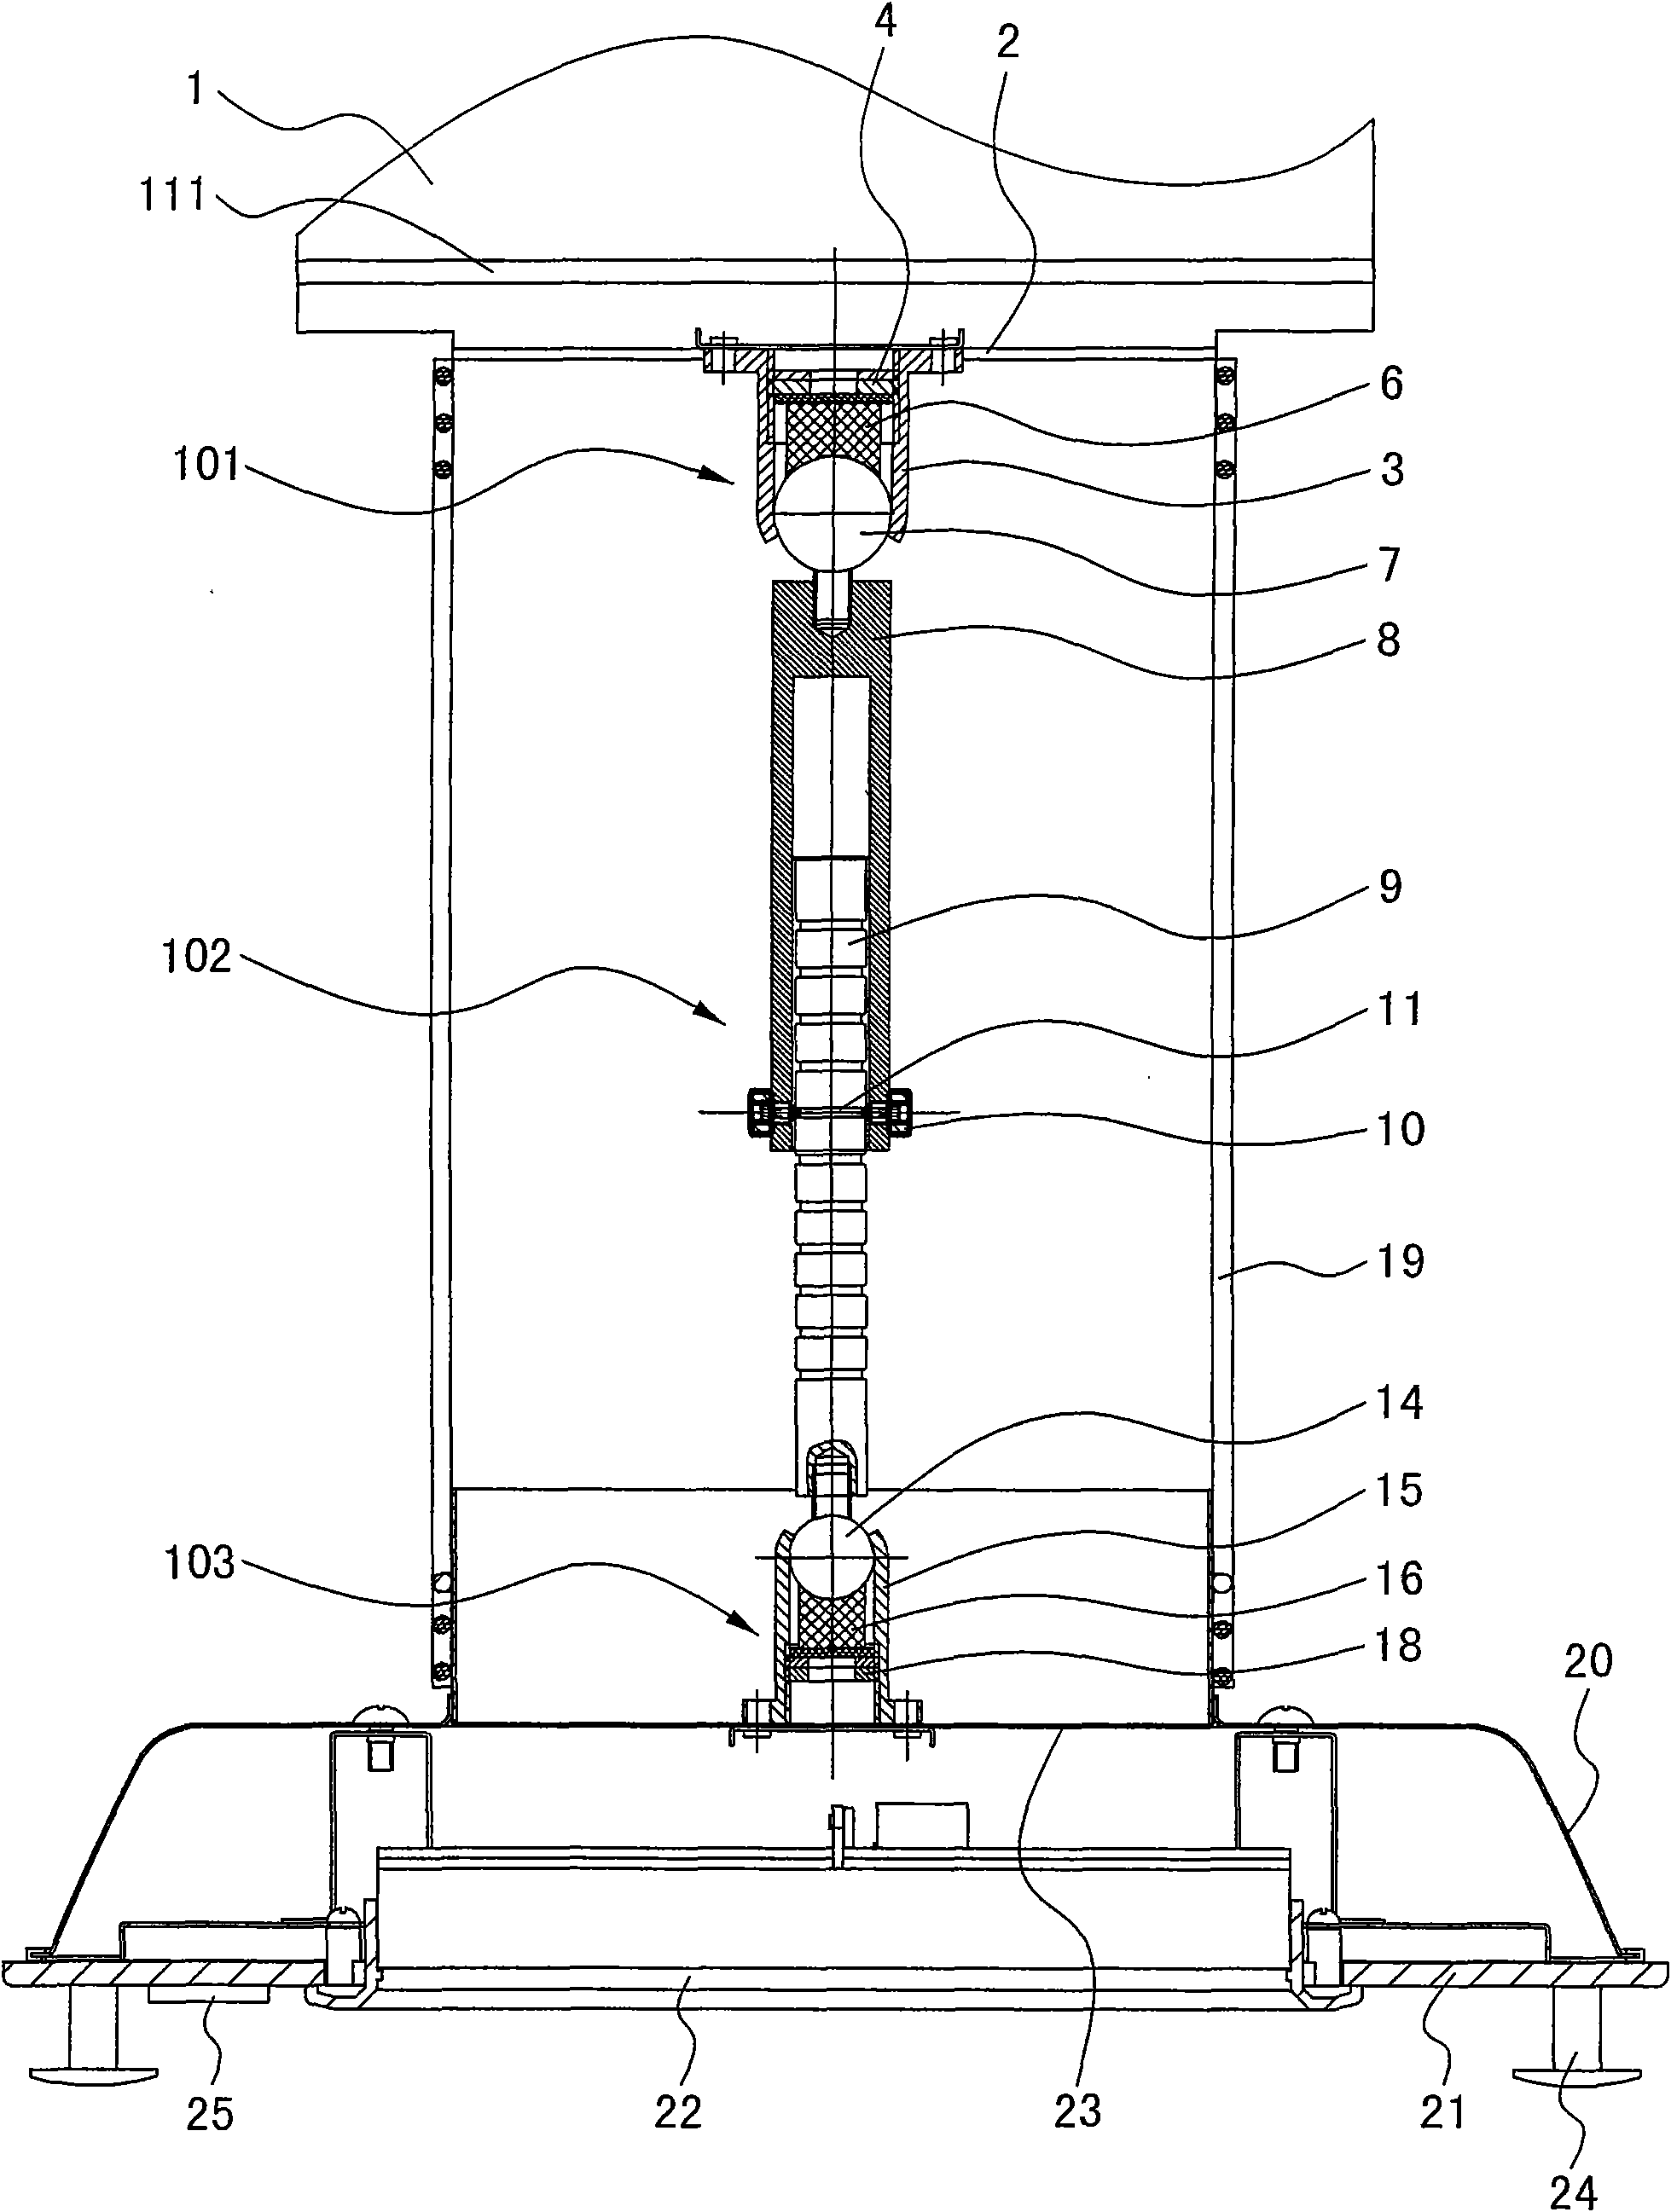 Central air conditioner end device